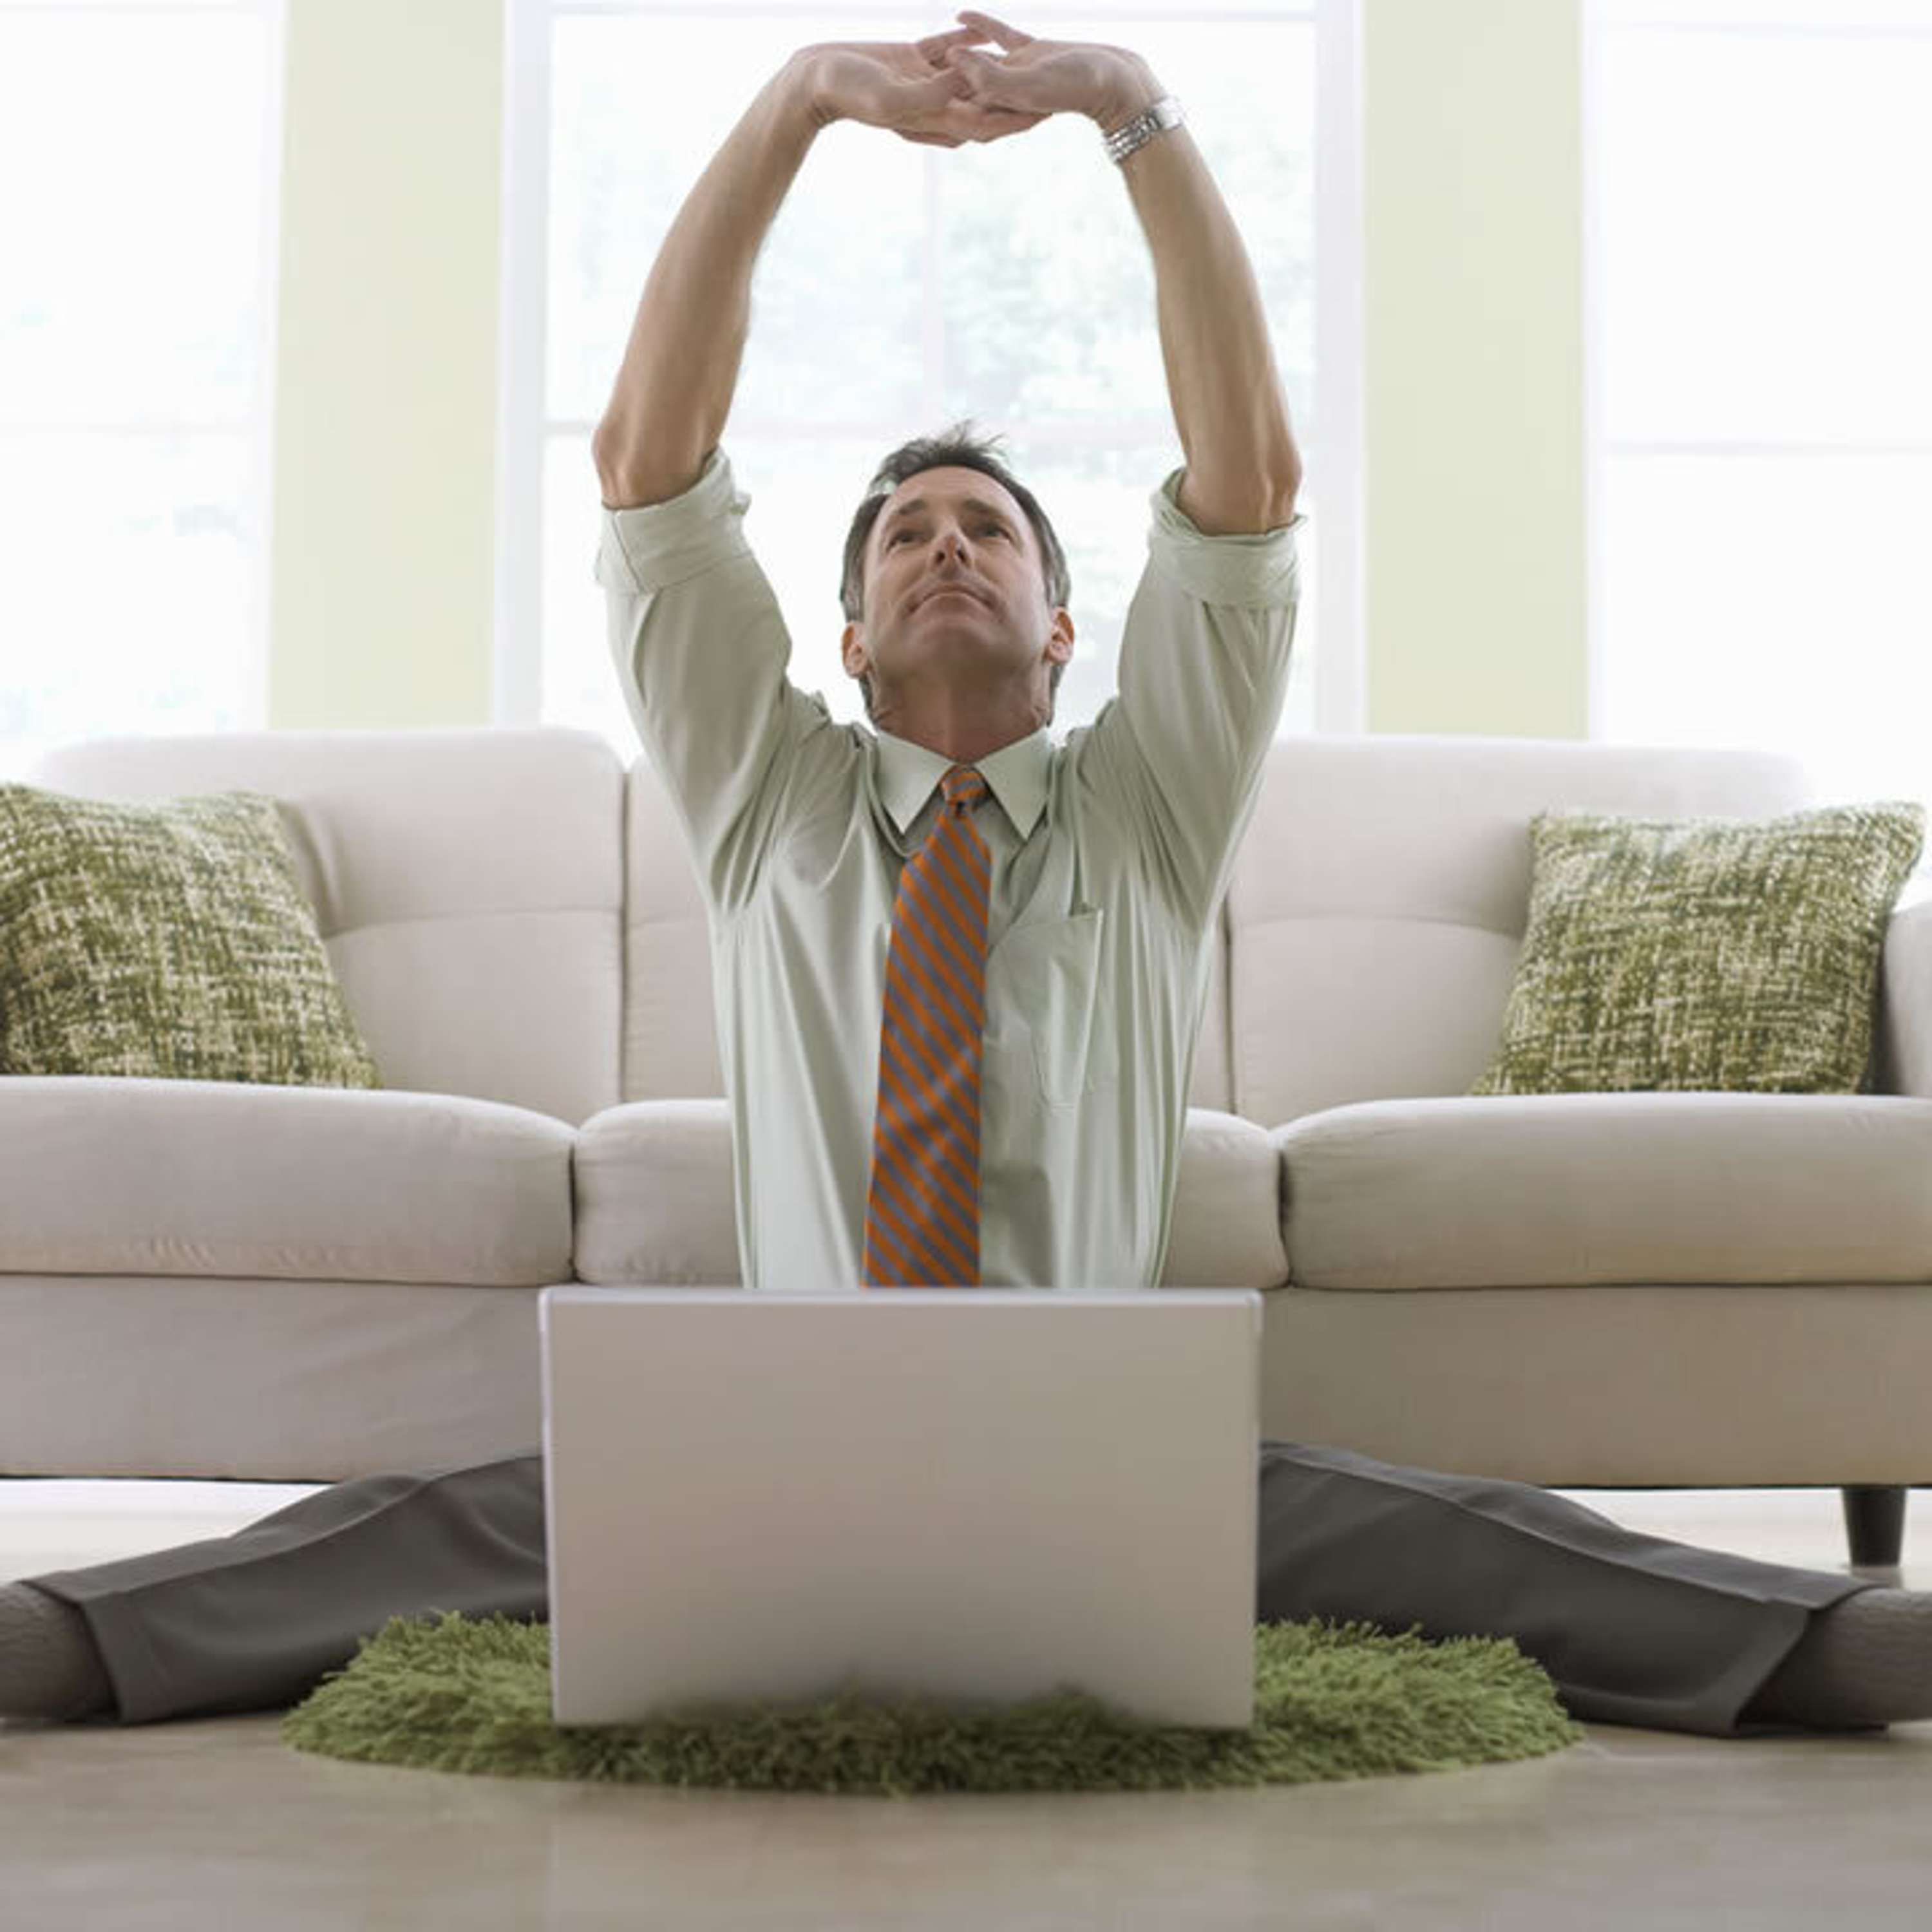 Telecommuting - The Art of Working At Home